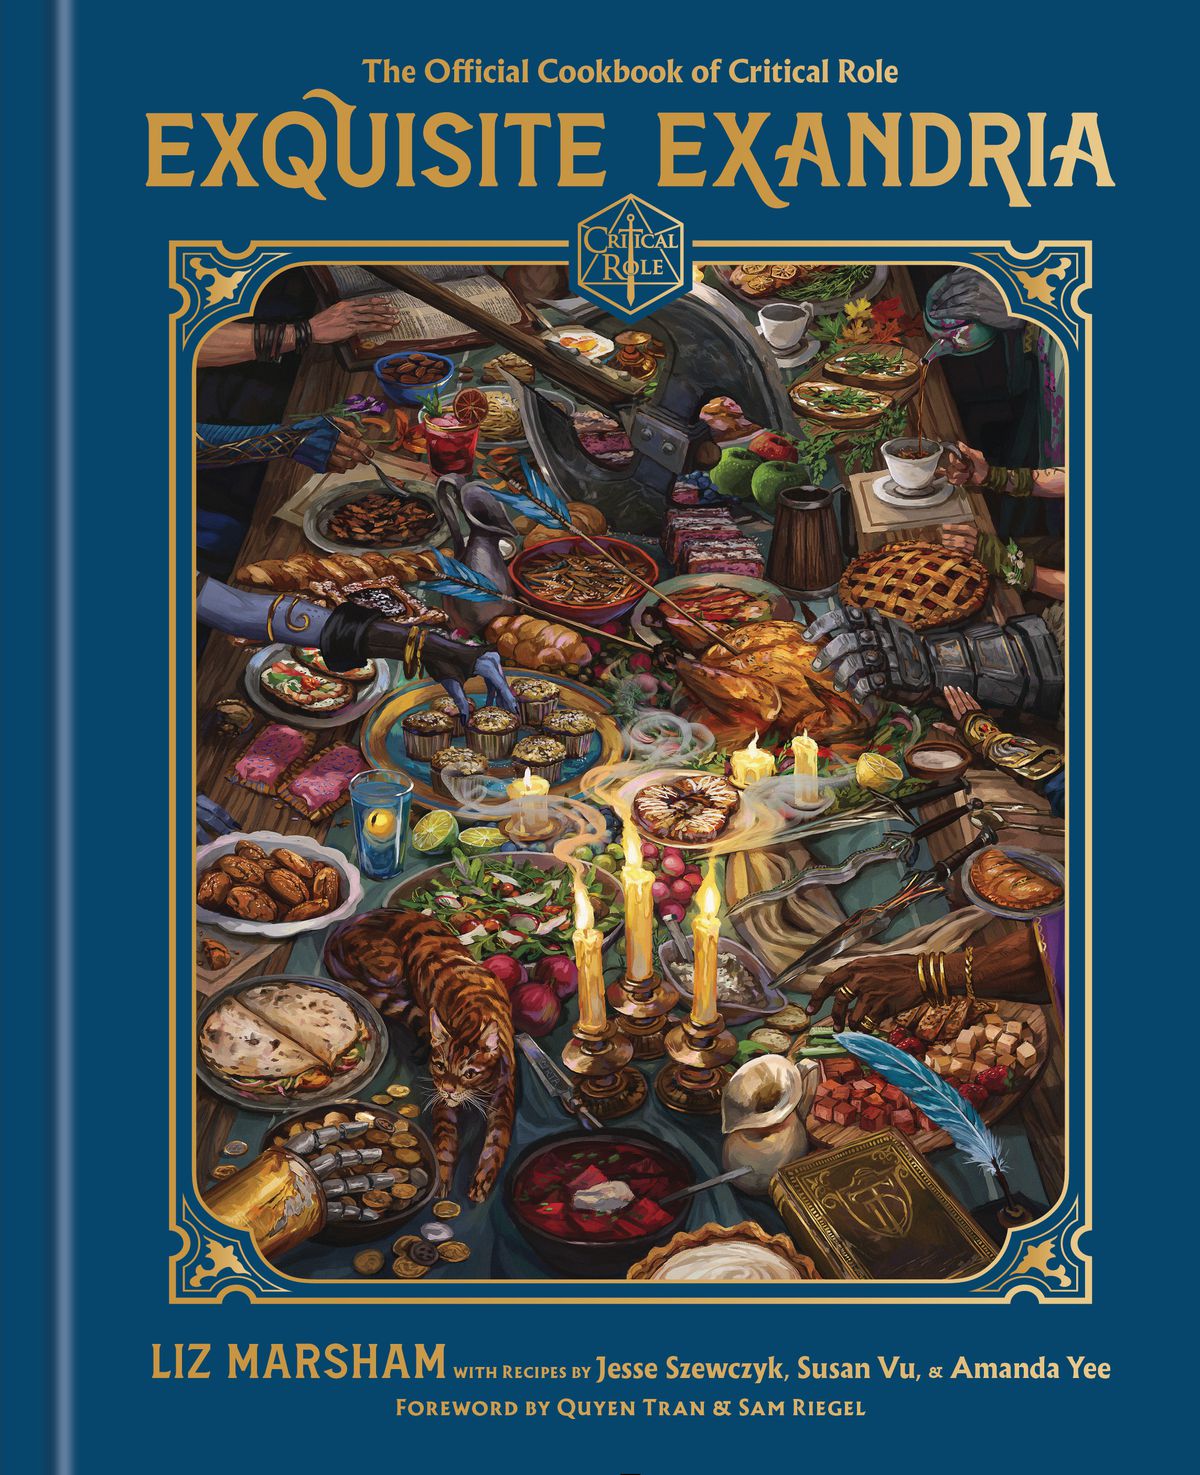 Critical Role cookbook gives us a taste of Vox Machina’s Tal’Dorei